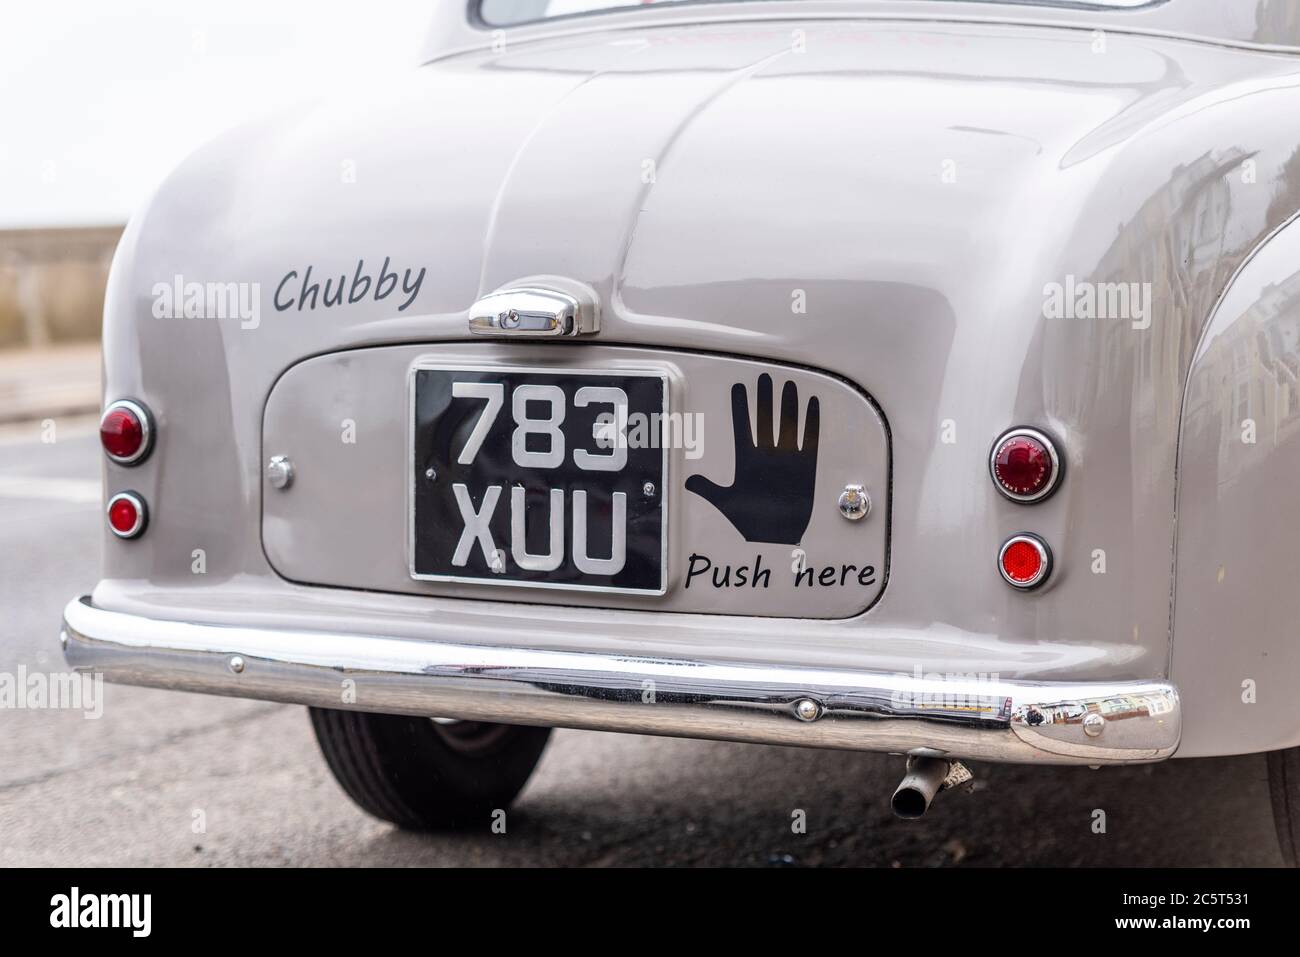 Rear of vintage car with push here graphic in Southend on Sea, Essex, UK. Named Chubby. 1954 Standard Motors Company SMC Standard Eight Stock Photo